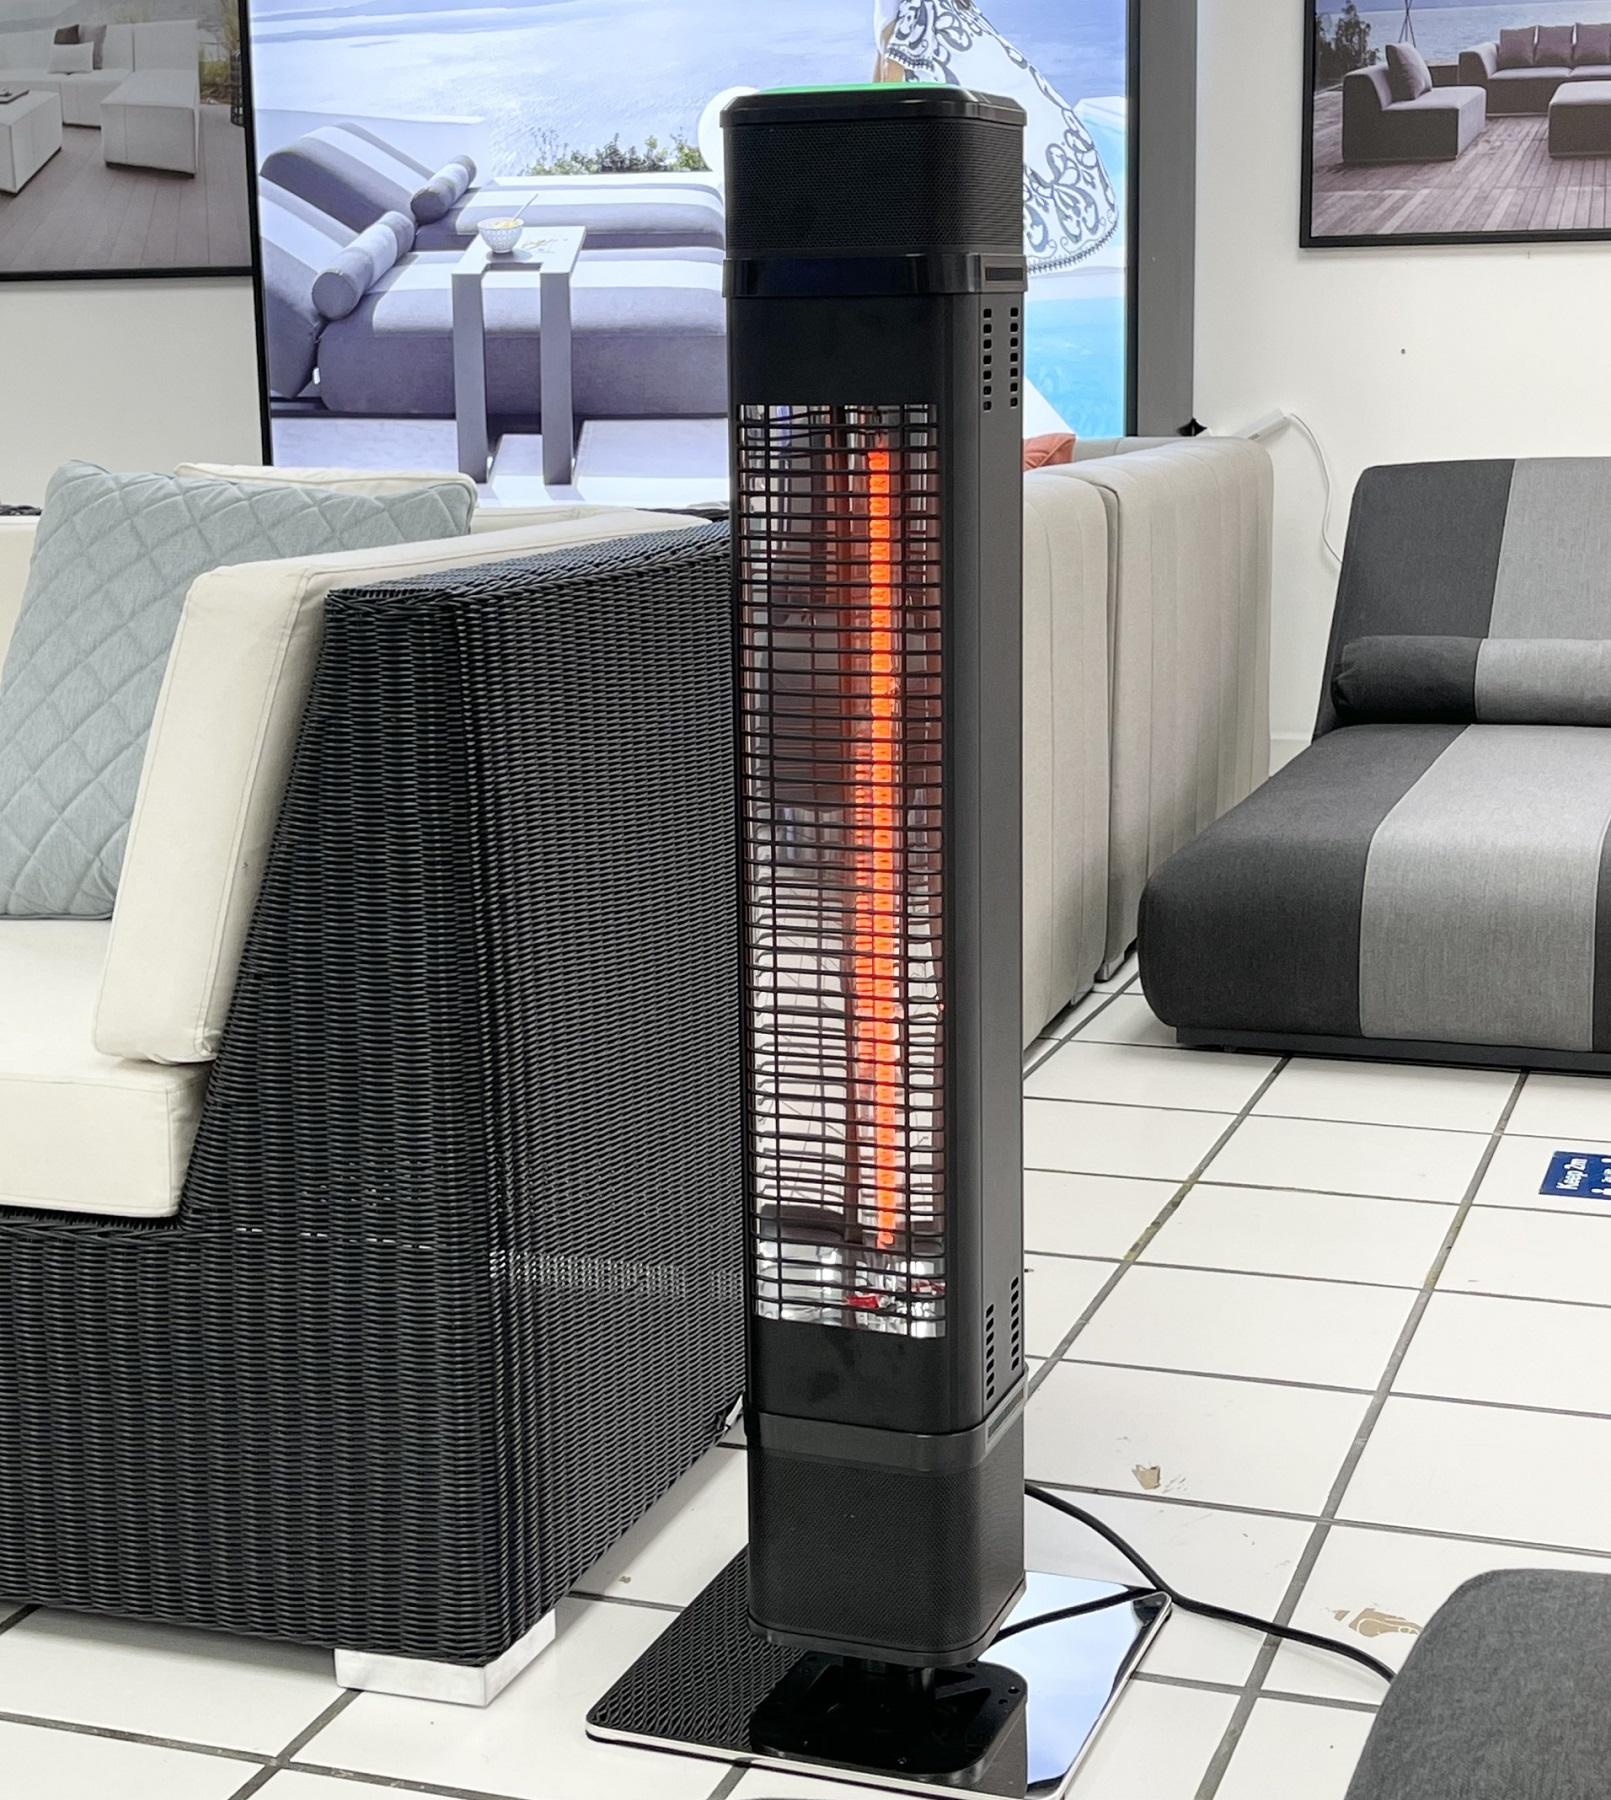 floor mounted upright electric garden patio heater and music speakers